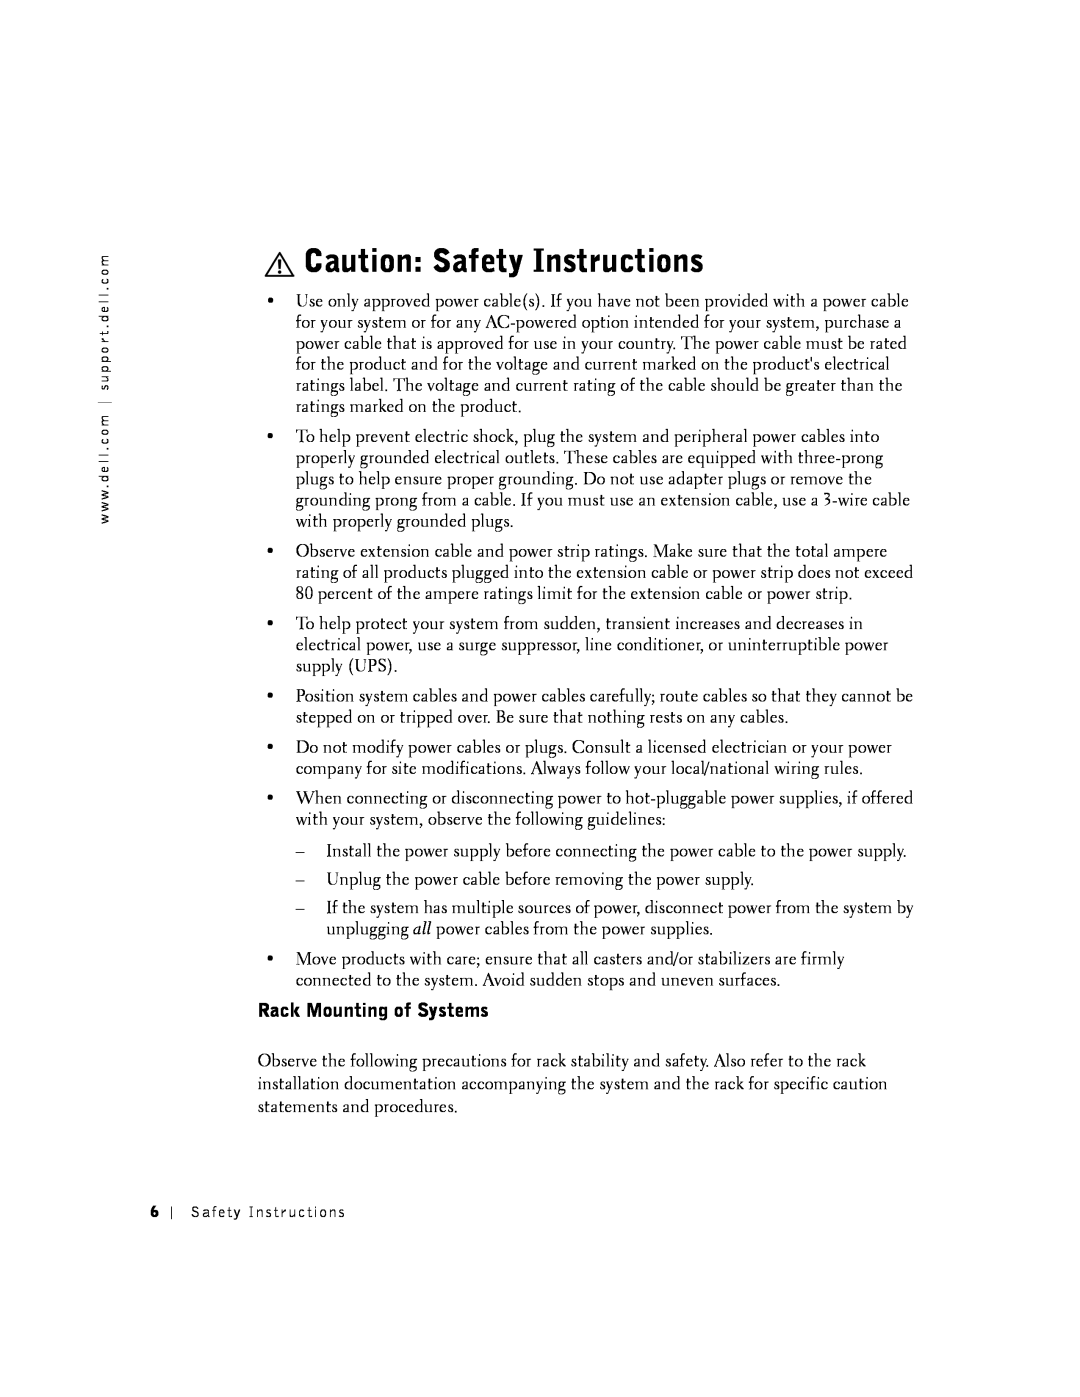 Dell 2016, 2024 manual Rack Mounting of Systems, Caution Safety Instructions 